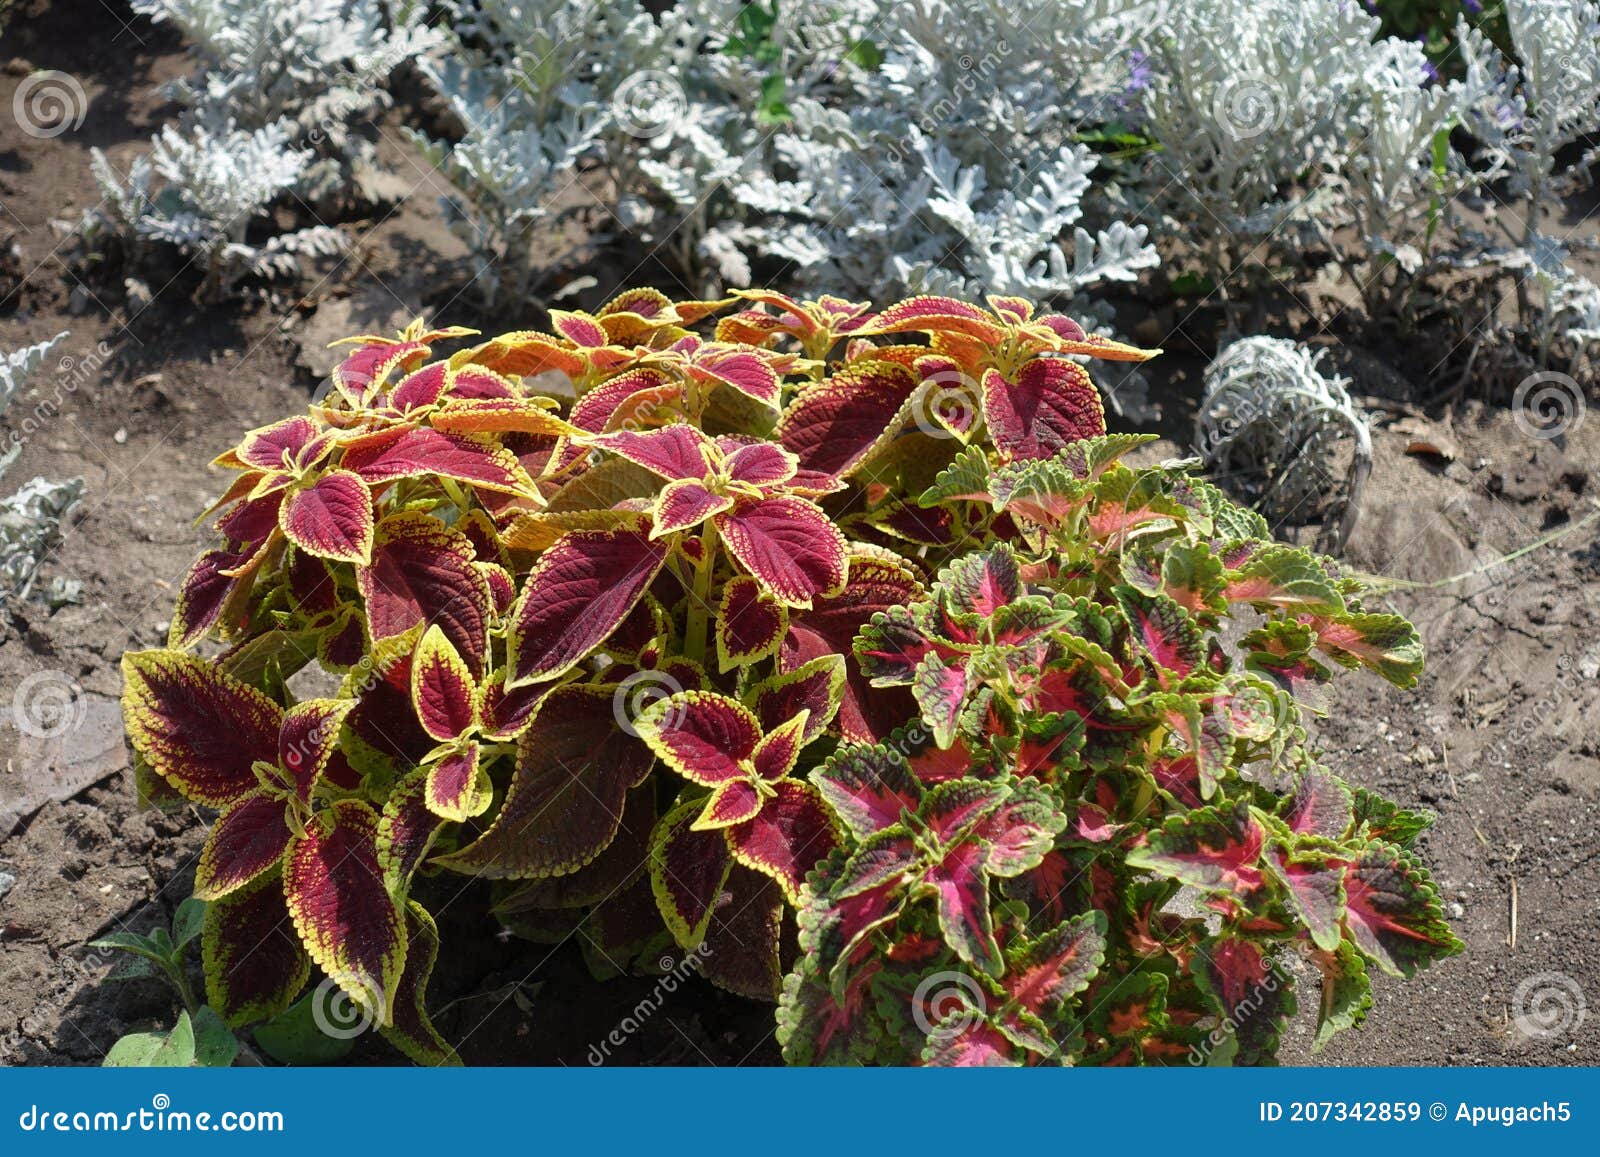 pair of cultivars of coleus scutellarioides with colorful foliage